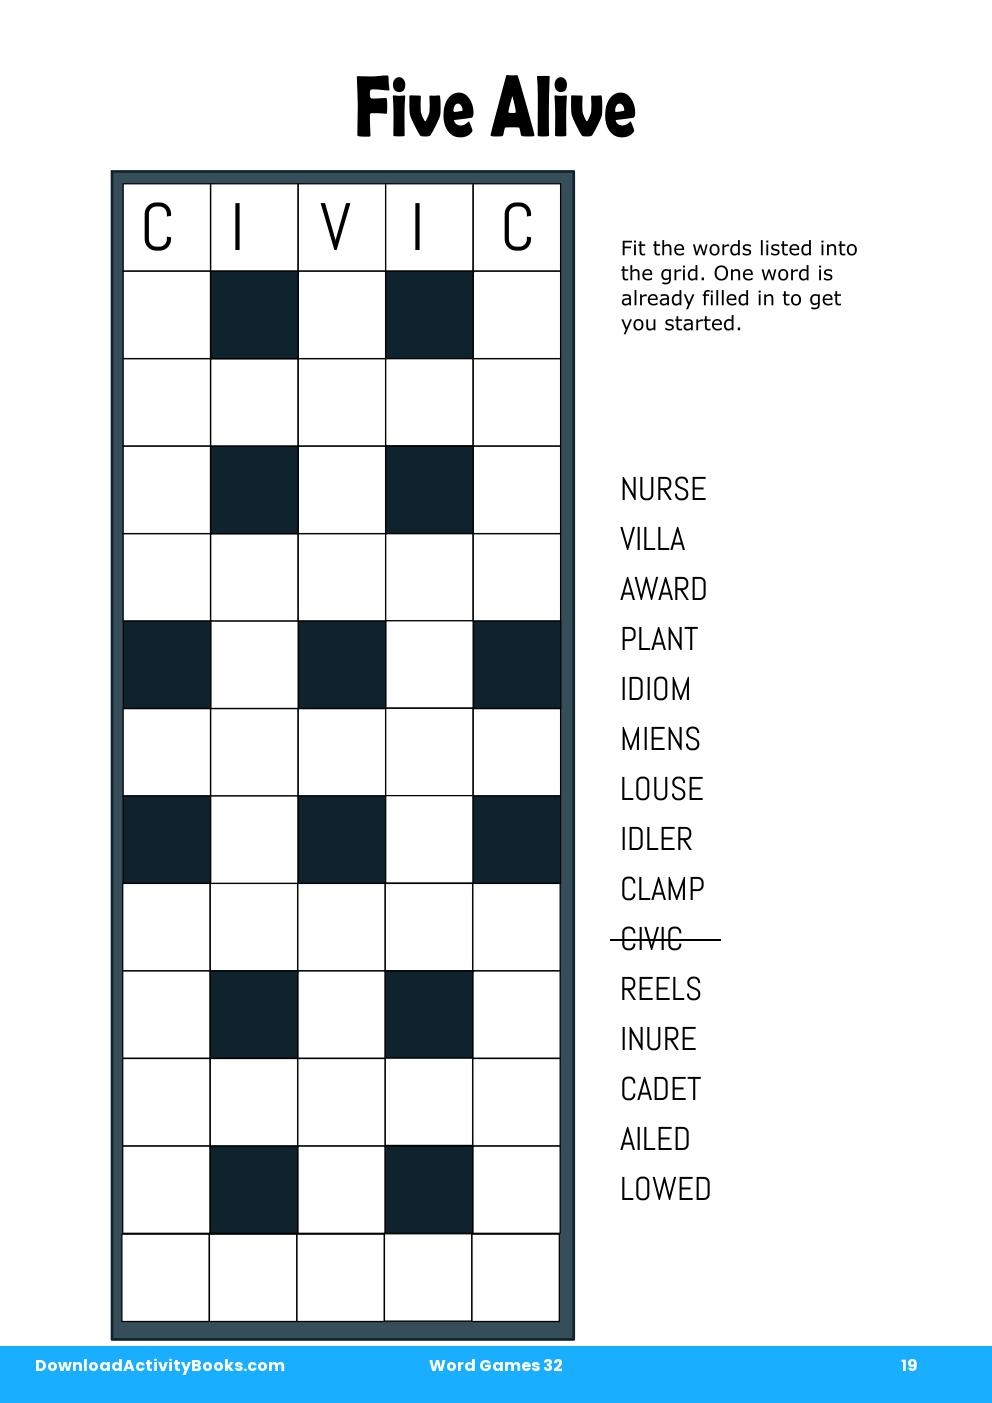 Five Alive in Word Games 32